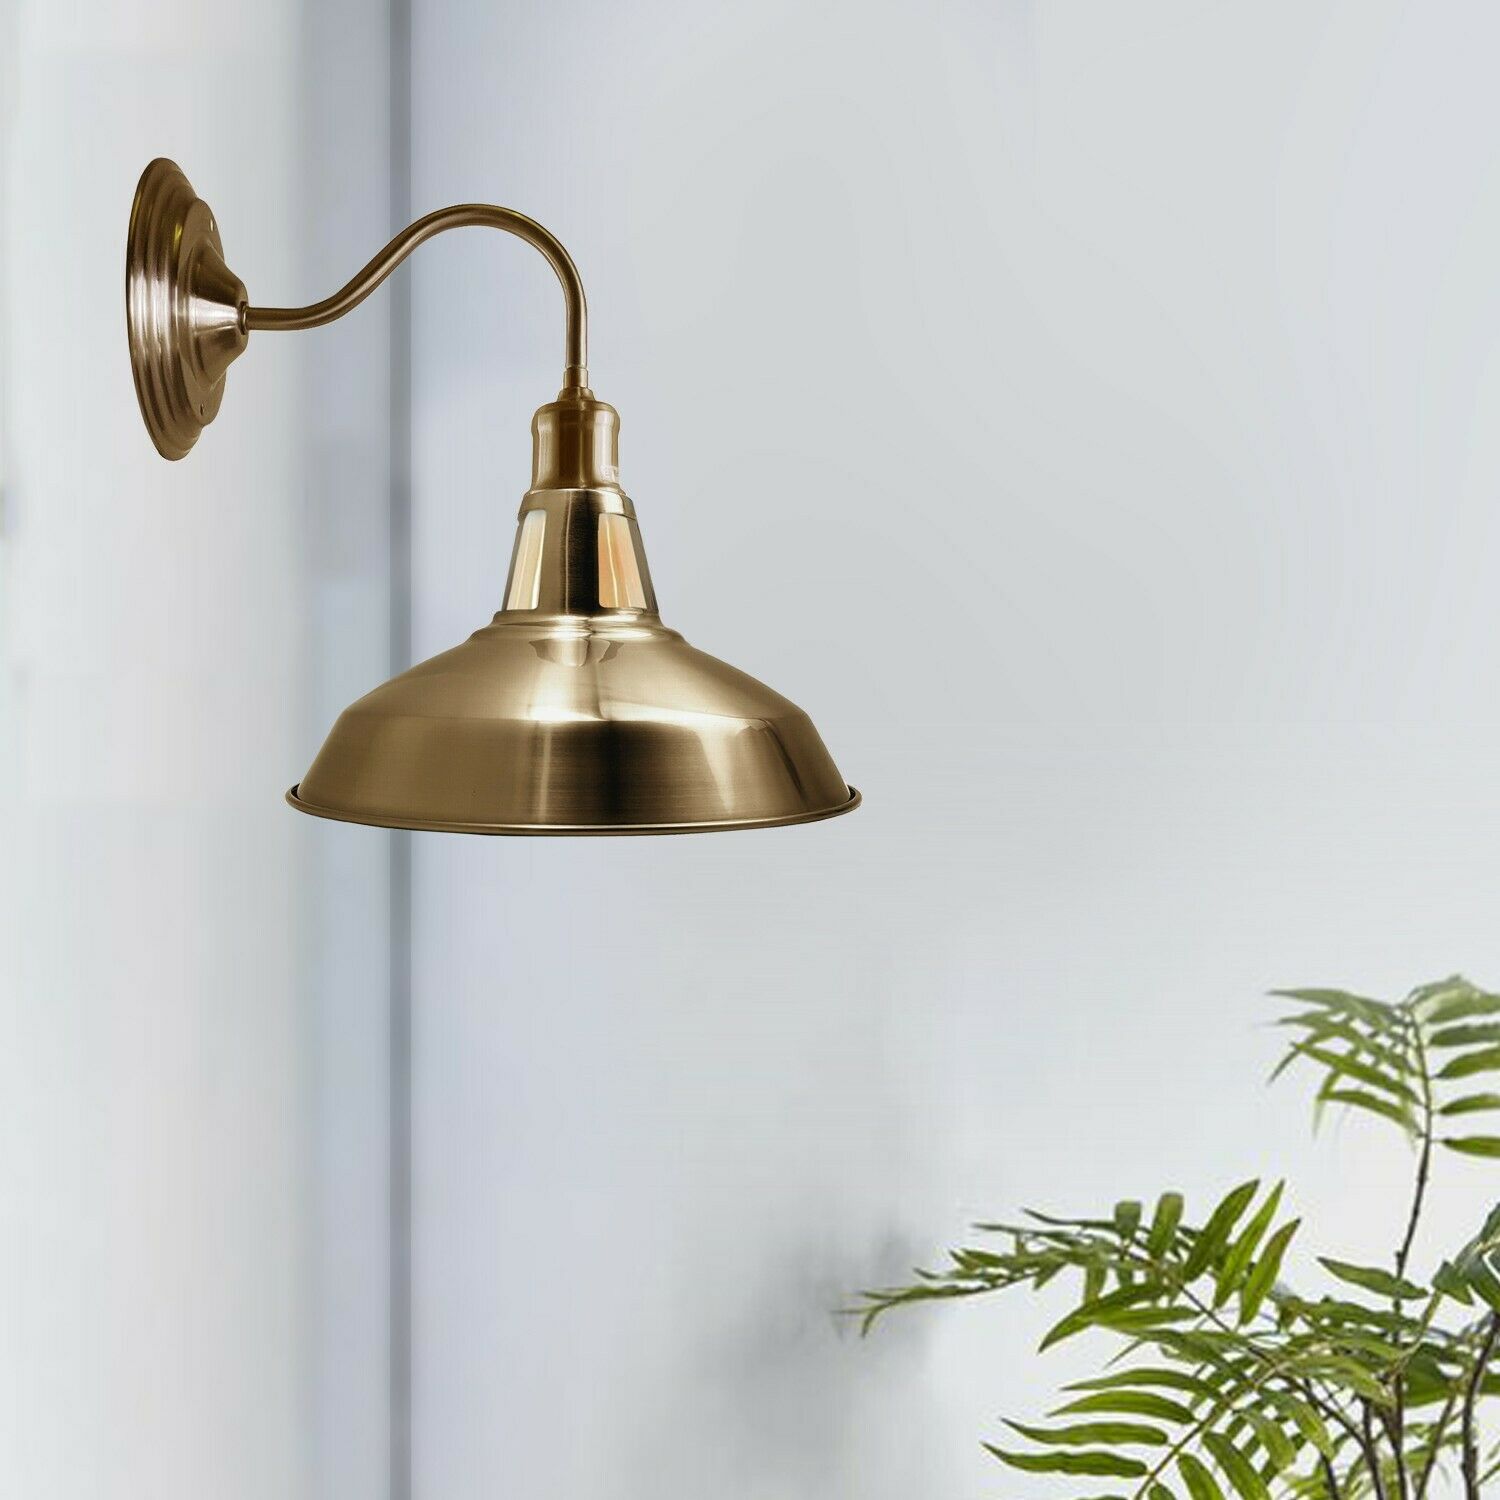 Modern Style High Polished Yellow Brass Wall Sconce with Vintage Retro Industrial Wall Light Shade-Application image 